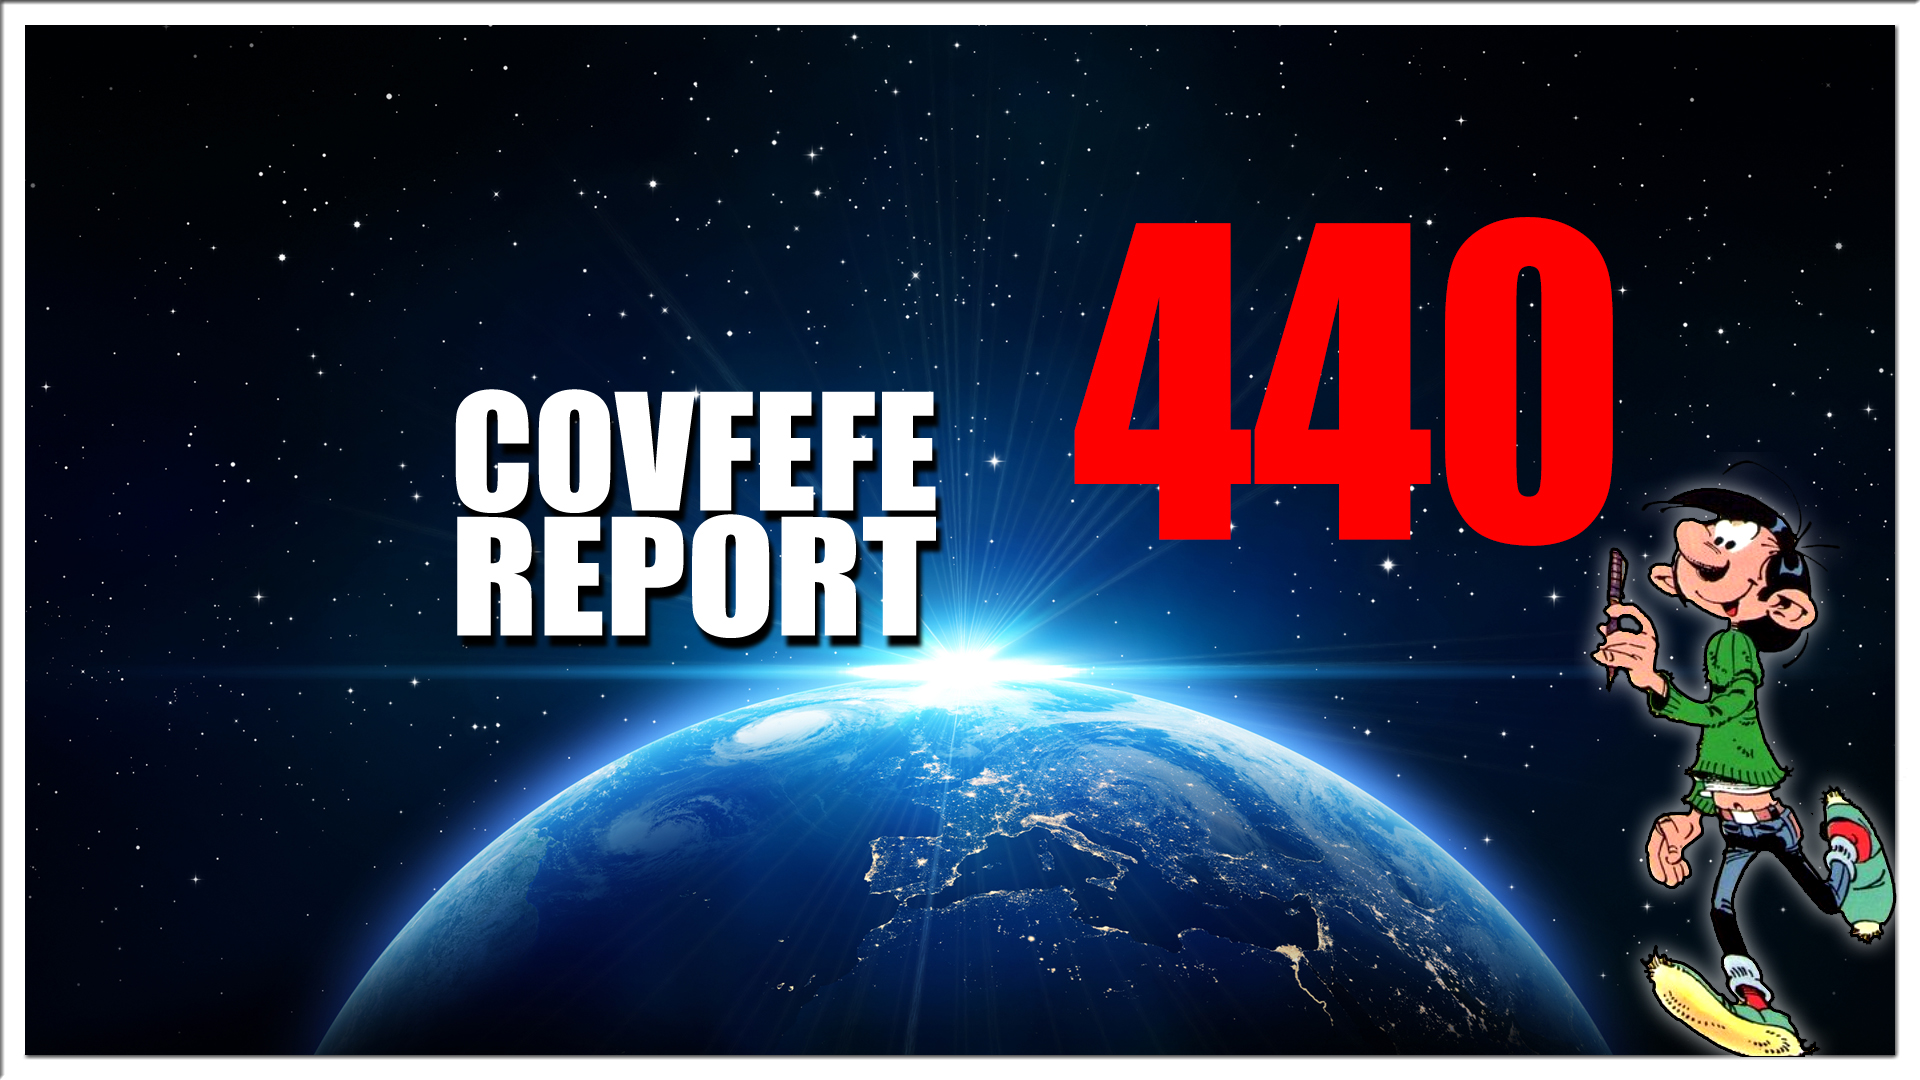 Covfefe Report 440. The STORM is COMING, Rode schoenen, Kate Spade, Qrebbel oproep